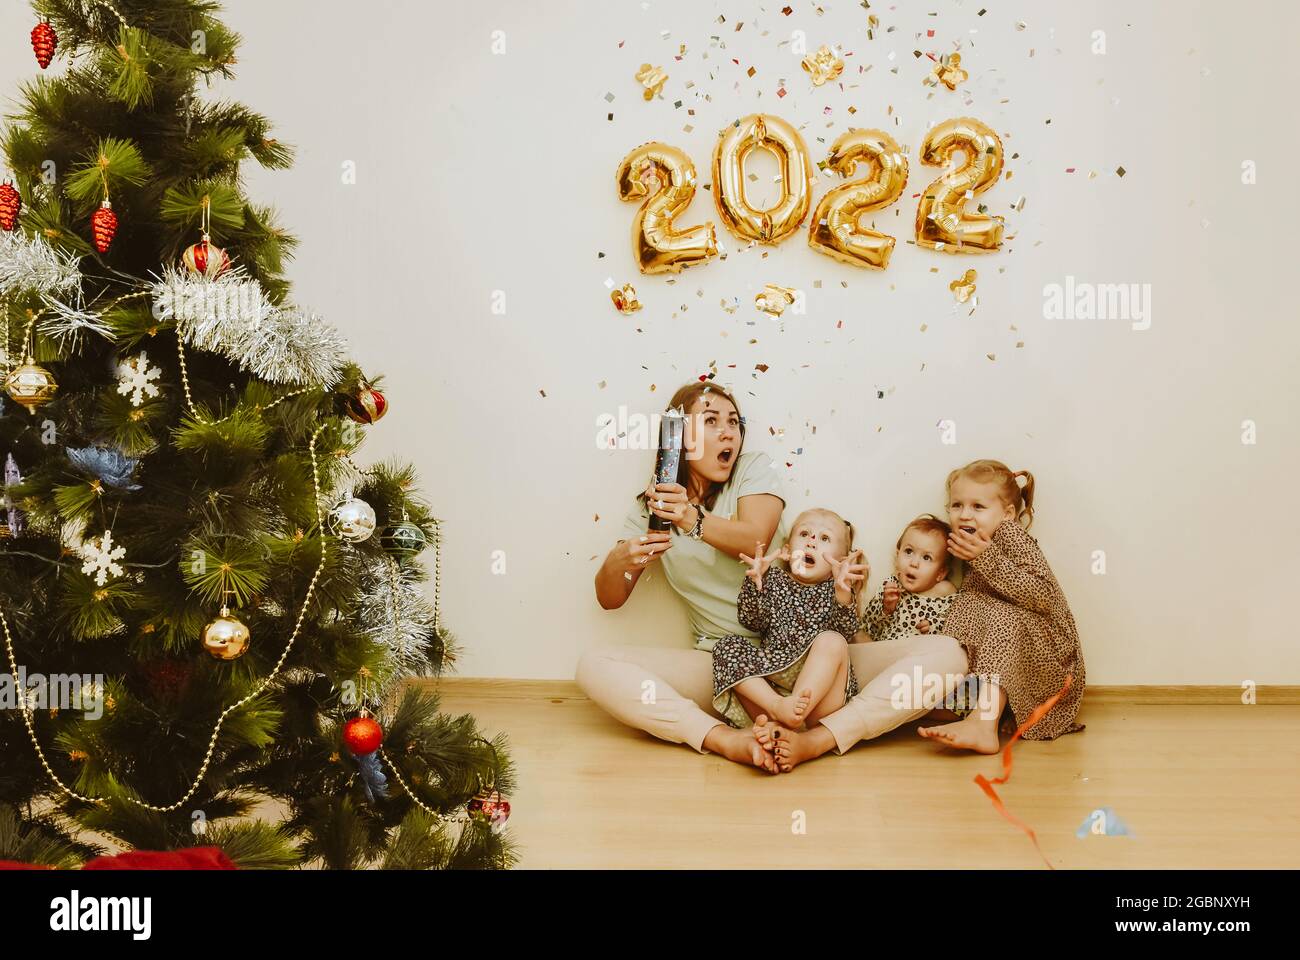 Mom and daughters with real emotions of joy explode a confetti clapper in the New Year 2022. Christmas family party at home with a Christmas tree and Stock Photo